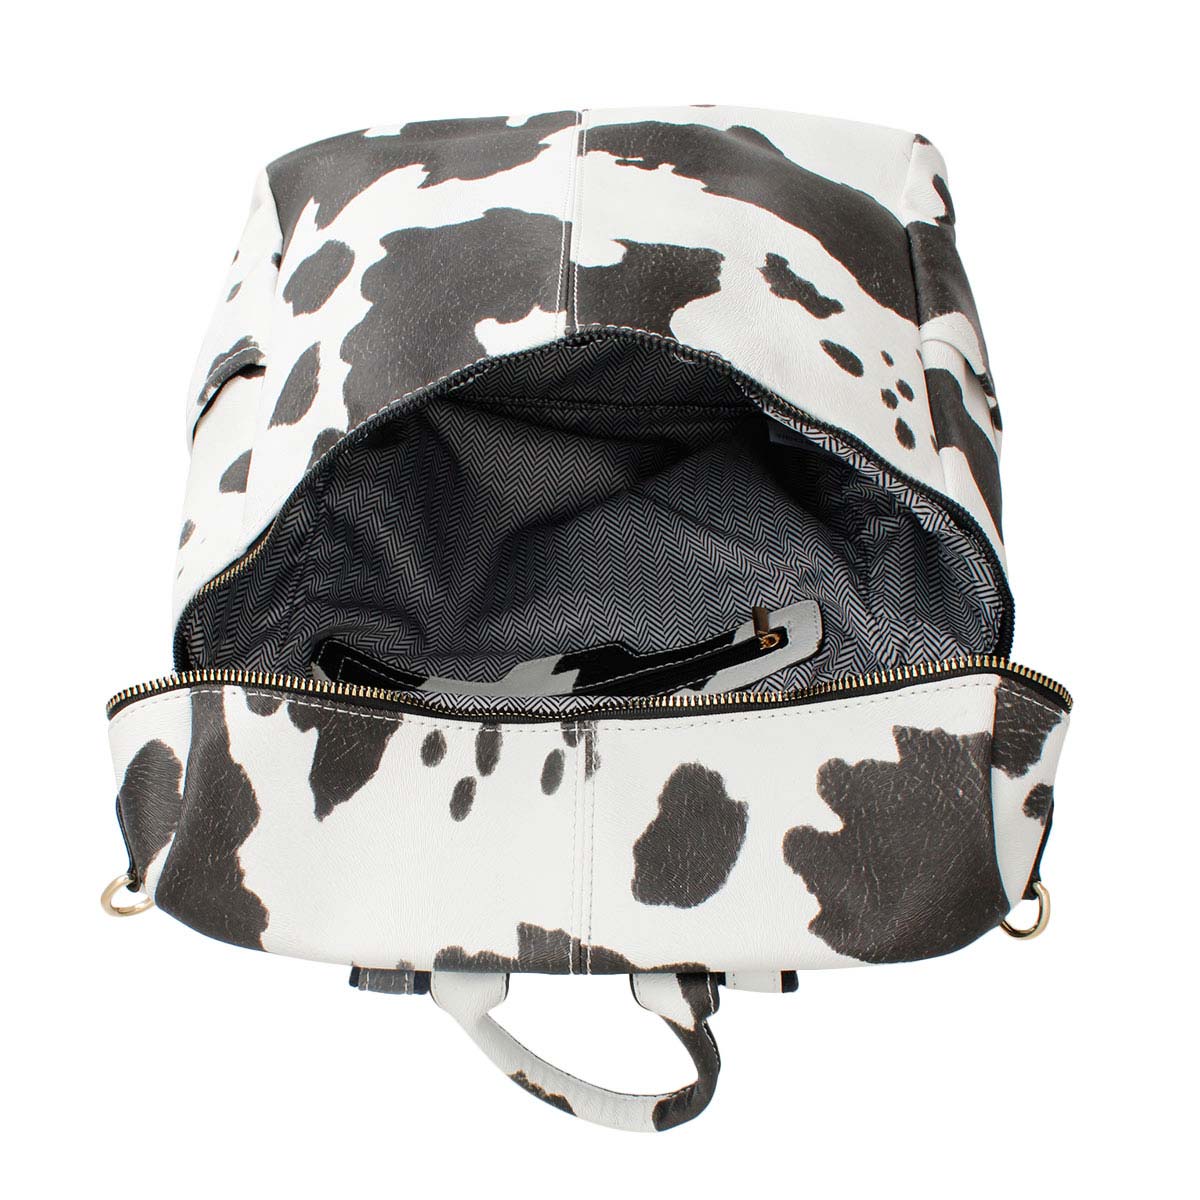 Cow Square Backpack Purse